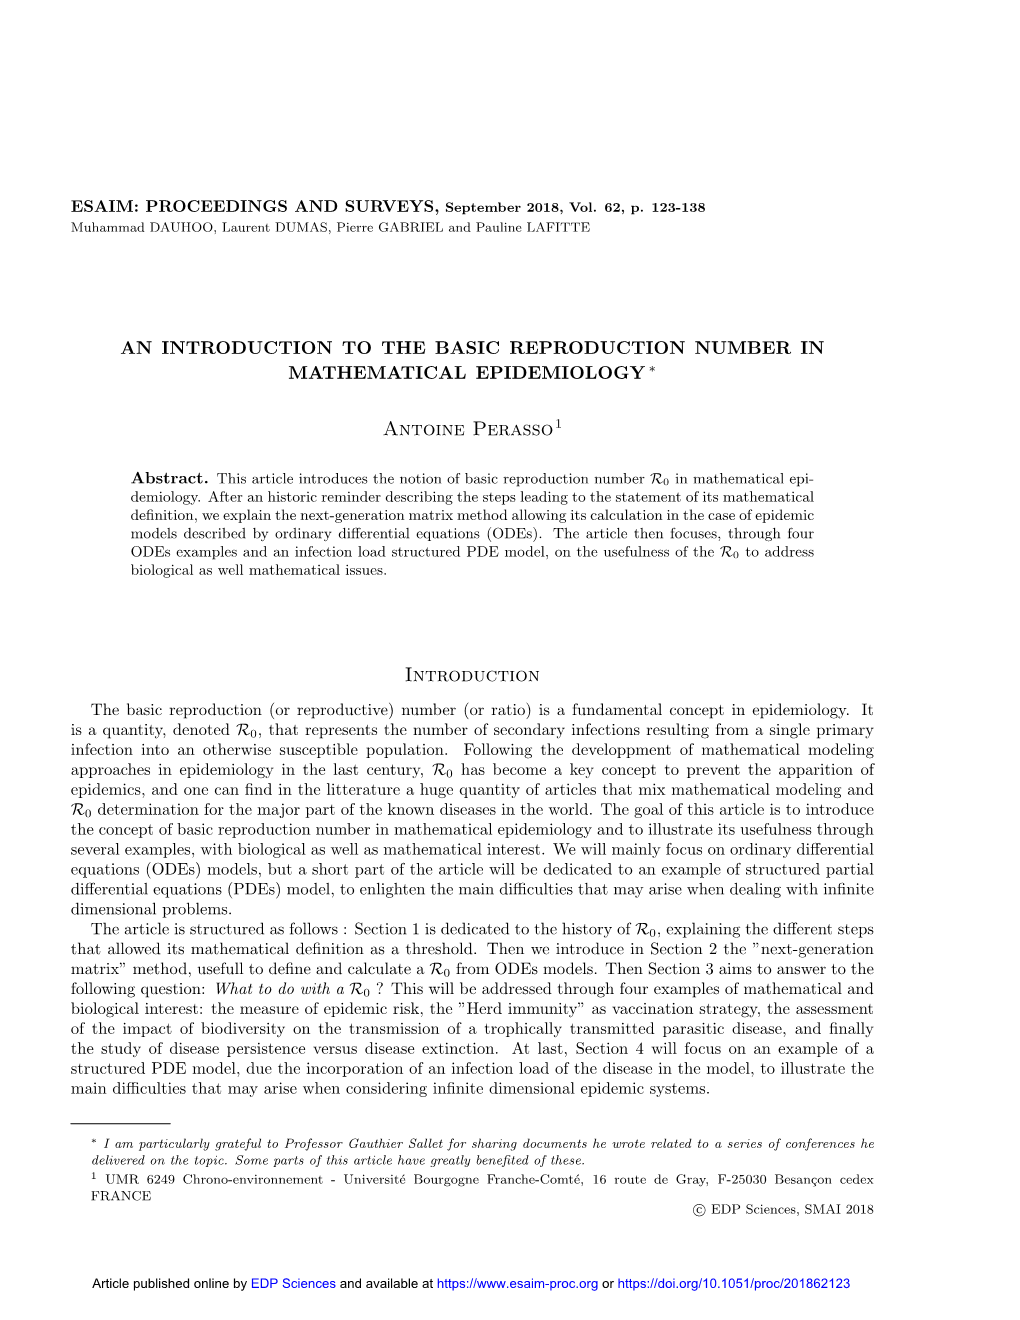 An Introduction to the Basic Reproduction Number in Mathematical Epidemiology ∗